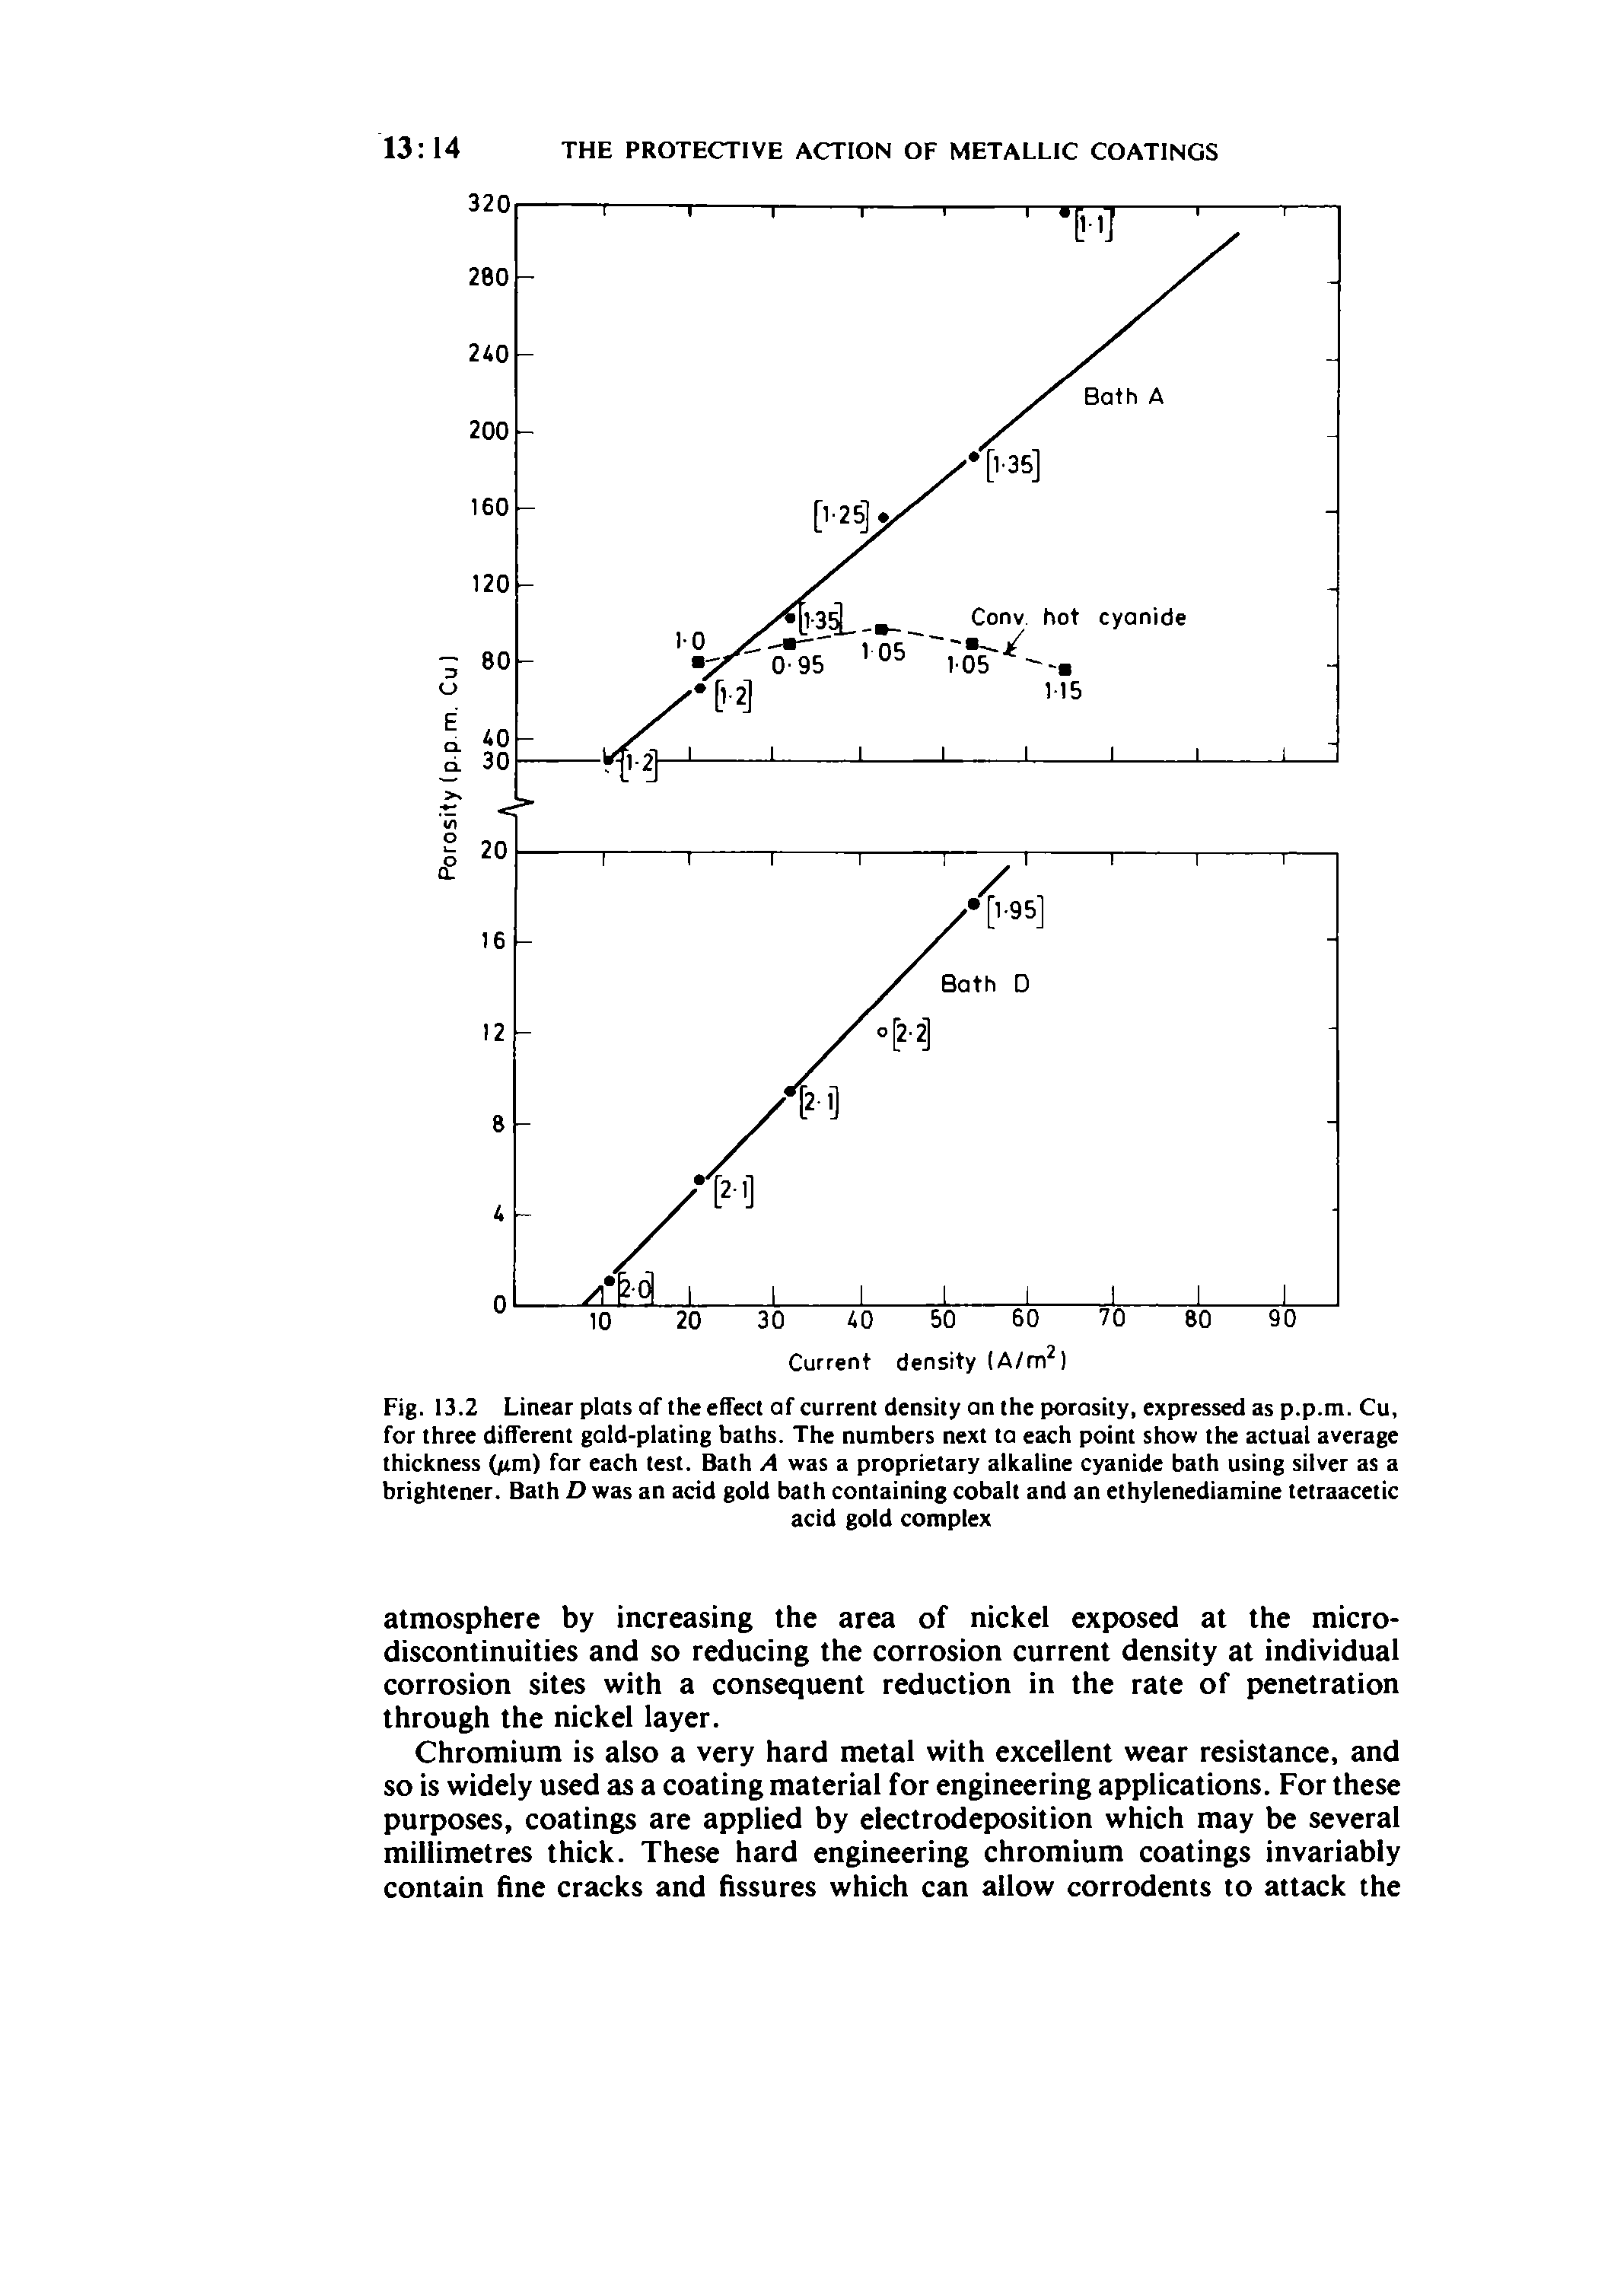 Fig. 13.2 Linear plats of the effect of current density an the porasity, expressed as p.p.m. Cu, for three different gald-plating baths. The numbers next ta each point show the actual average thickness Orm) for each test. Bath A was a proprietary alkaline cyanide bath using silver as a brightener. Bath D was an acid gold bath containing cobalt and an ethylenediamine tetraacetic...